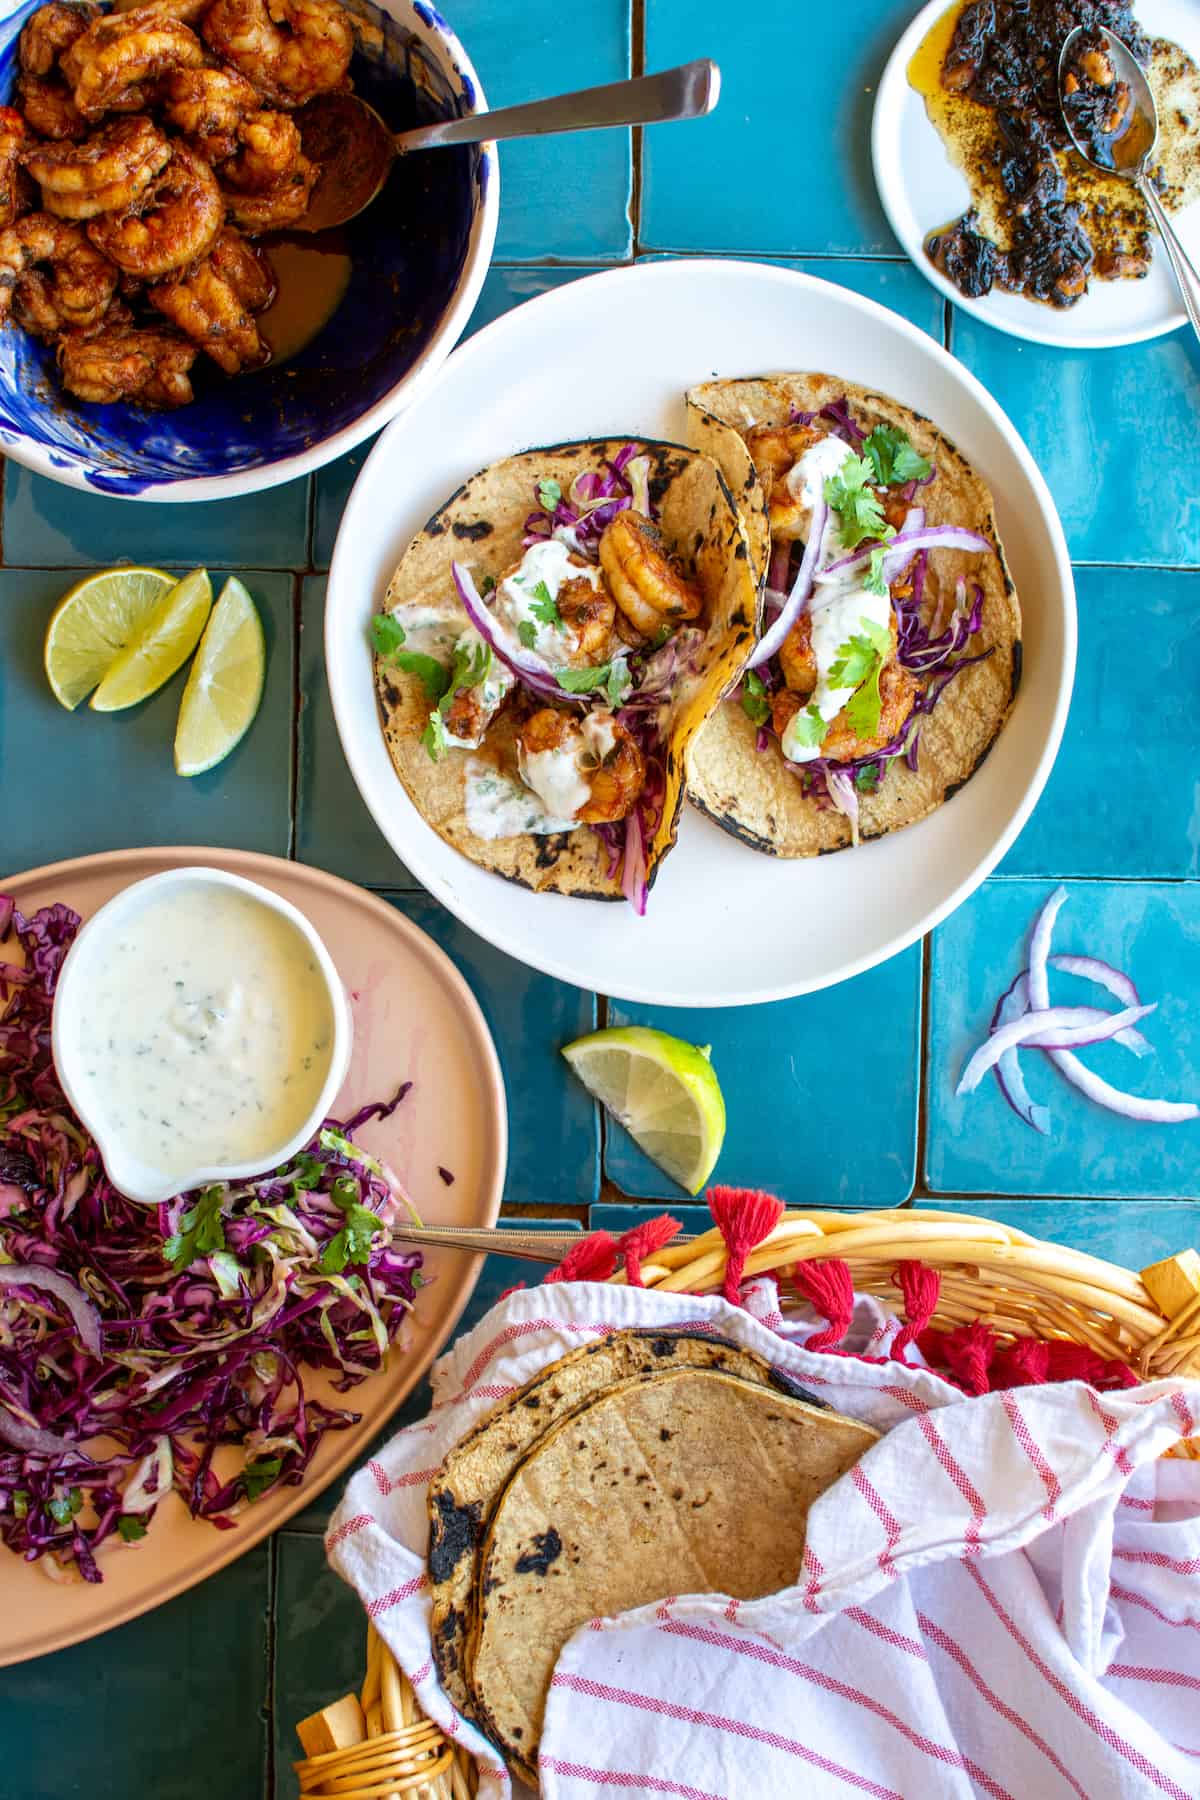 A white plate of shrimp tacos sitting on a blue tiled table next to a bowl of the charred shrimp, a basket of corn tortillas, and some purple cabbage slaw.